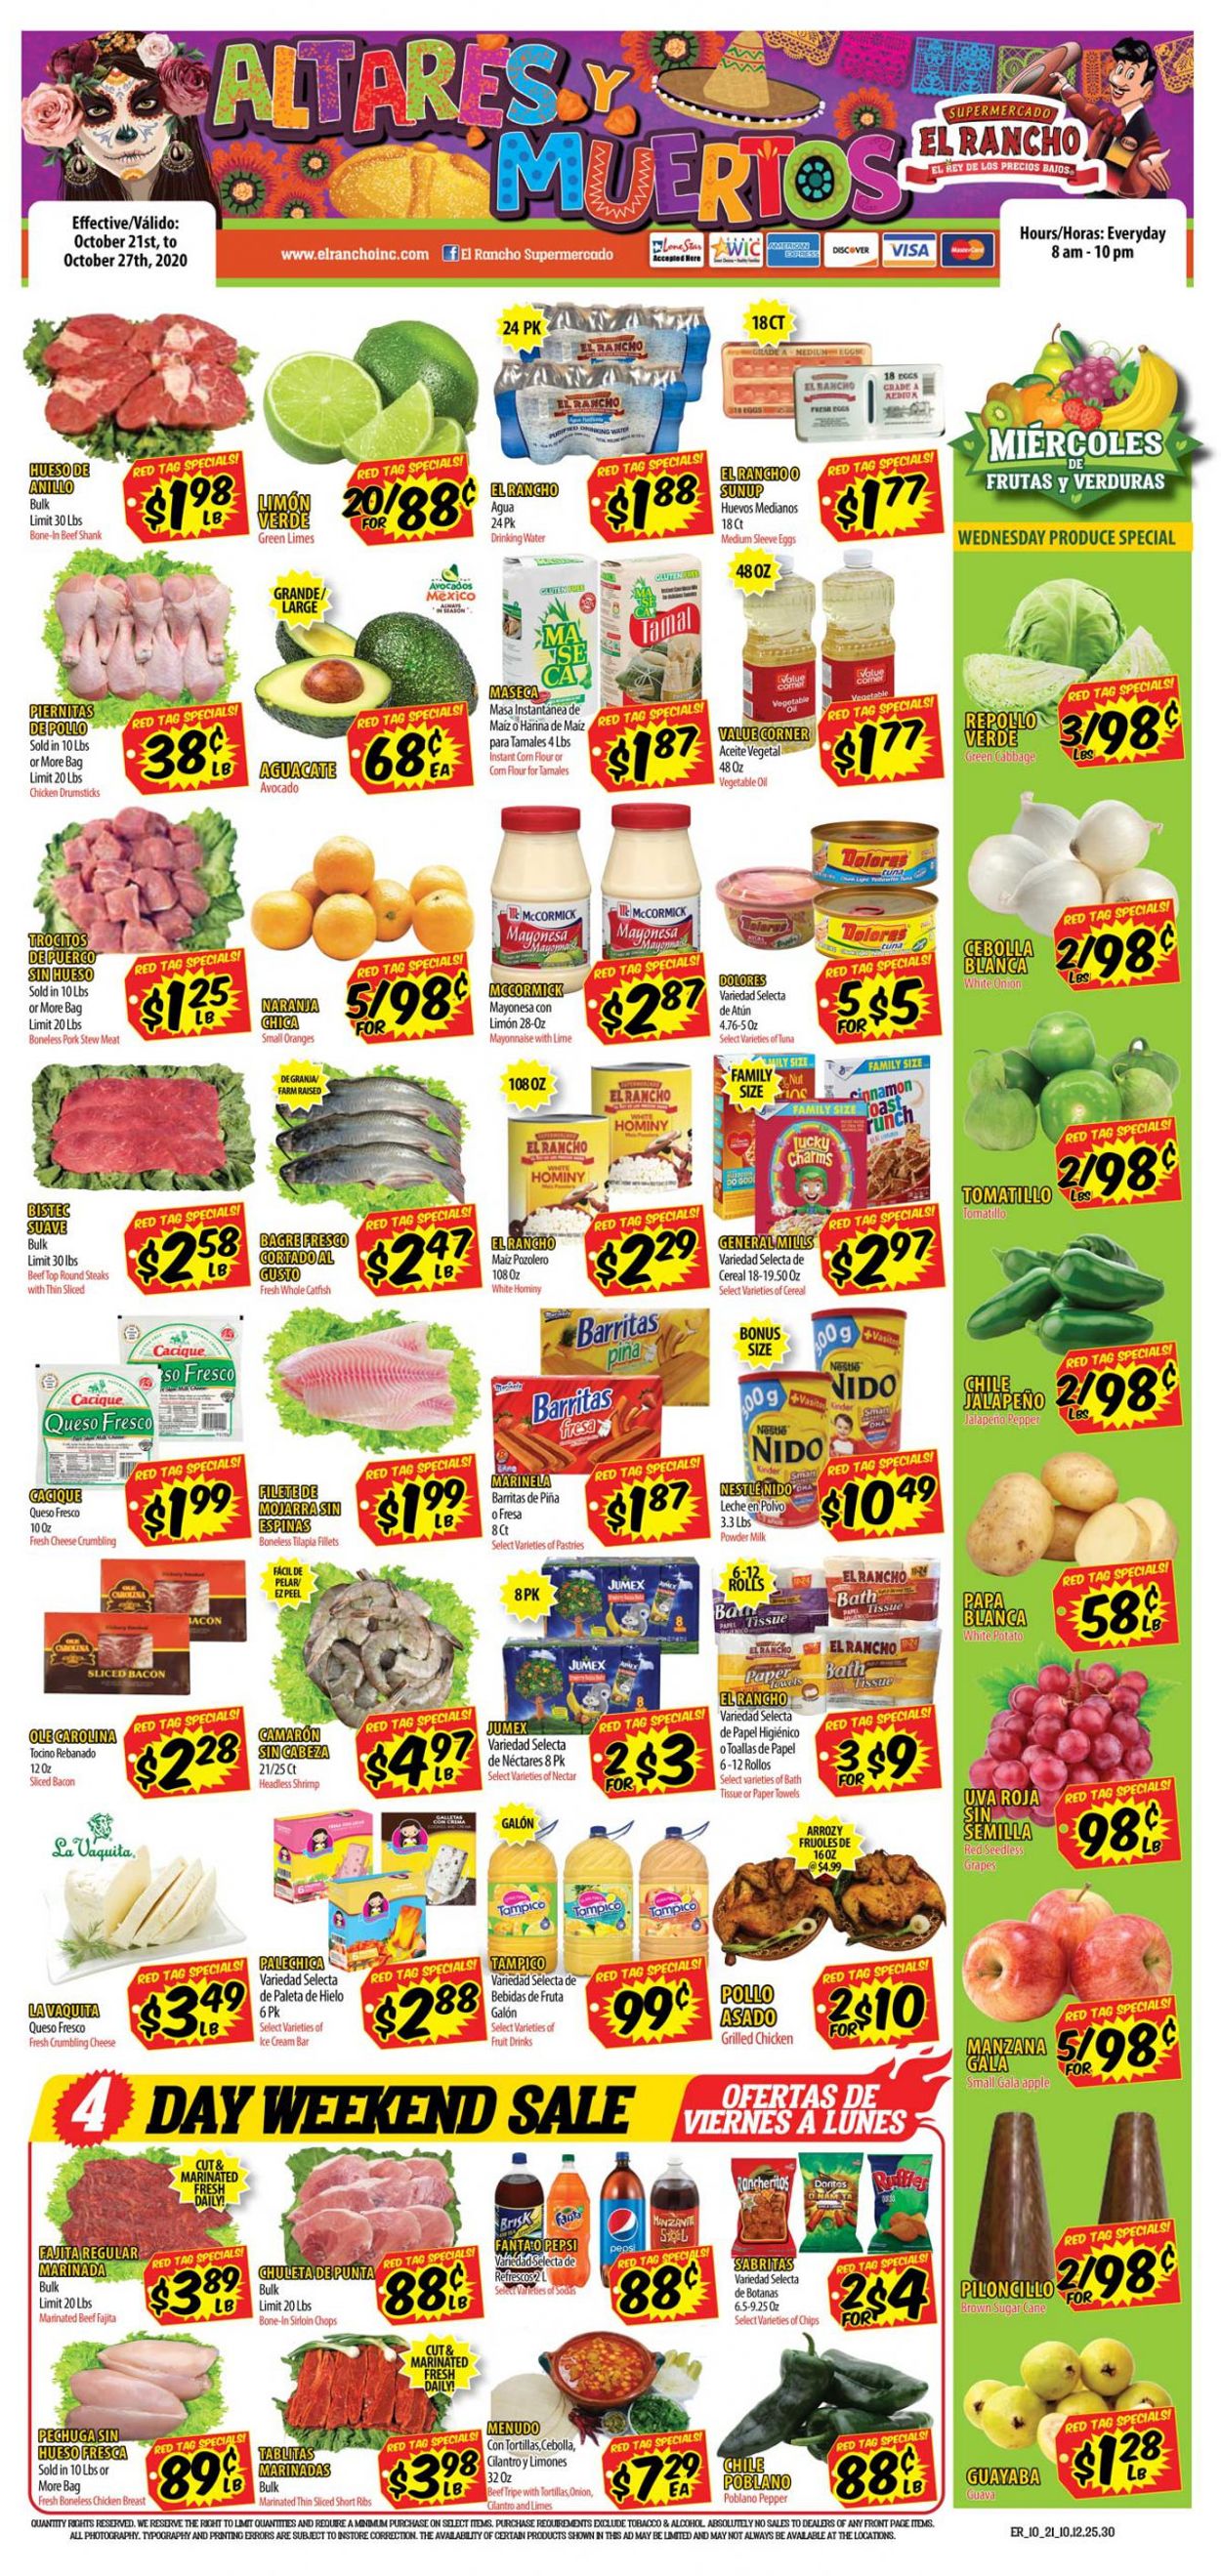 El Rancho Current weekly ad 10/21 - 10/27/2020 - frequent-ads.com